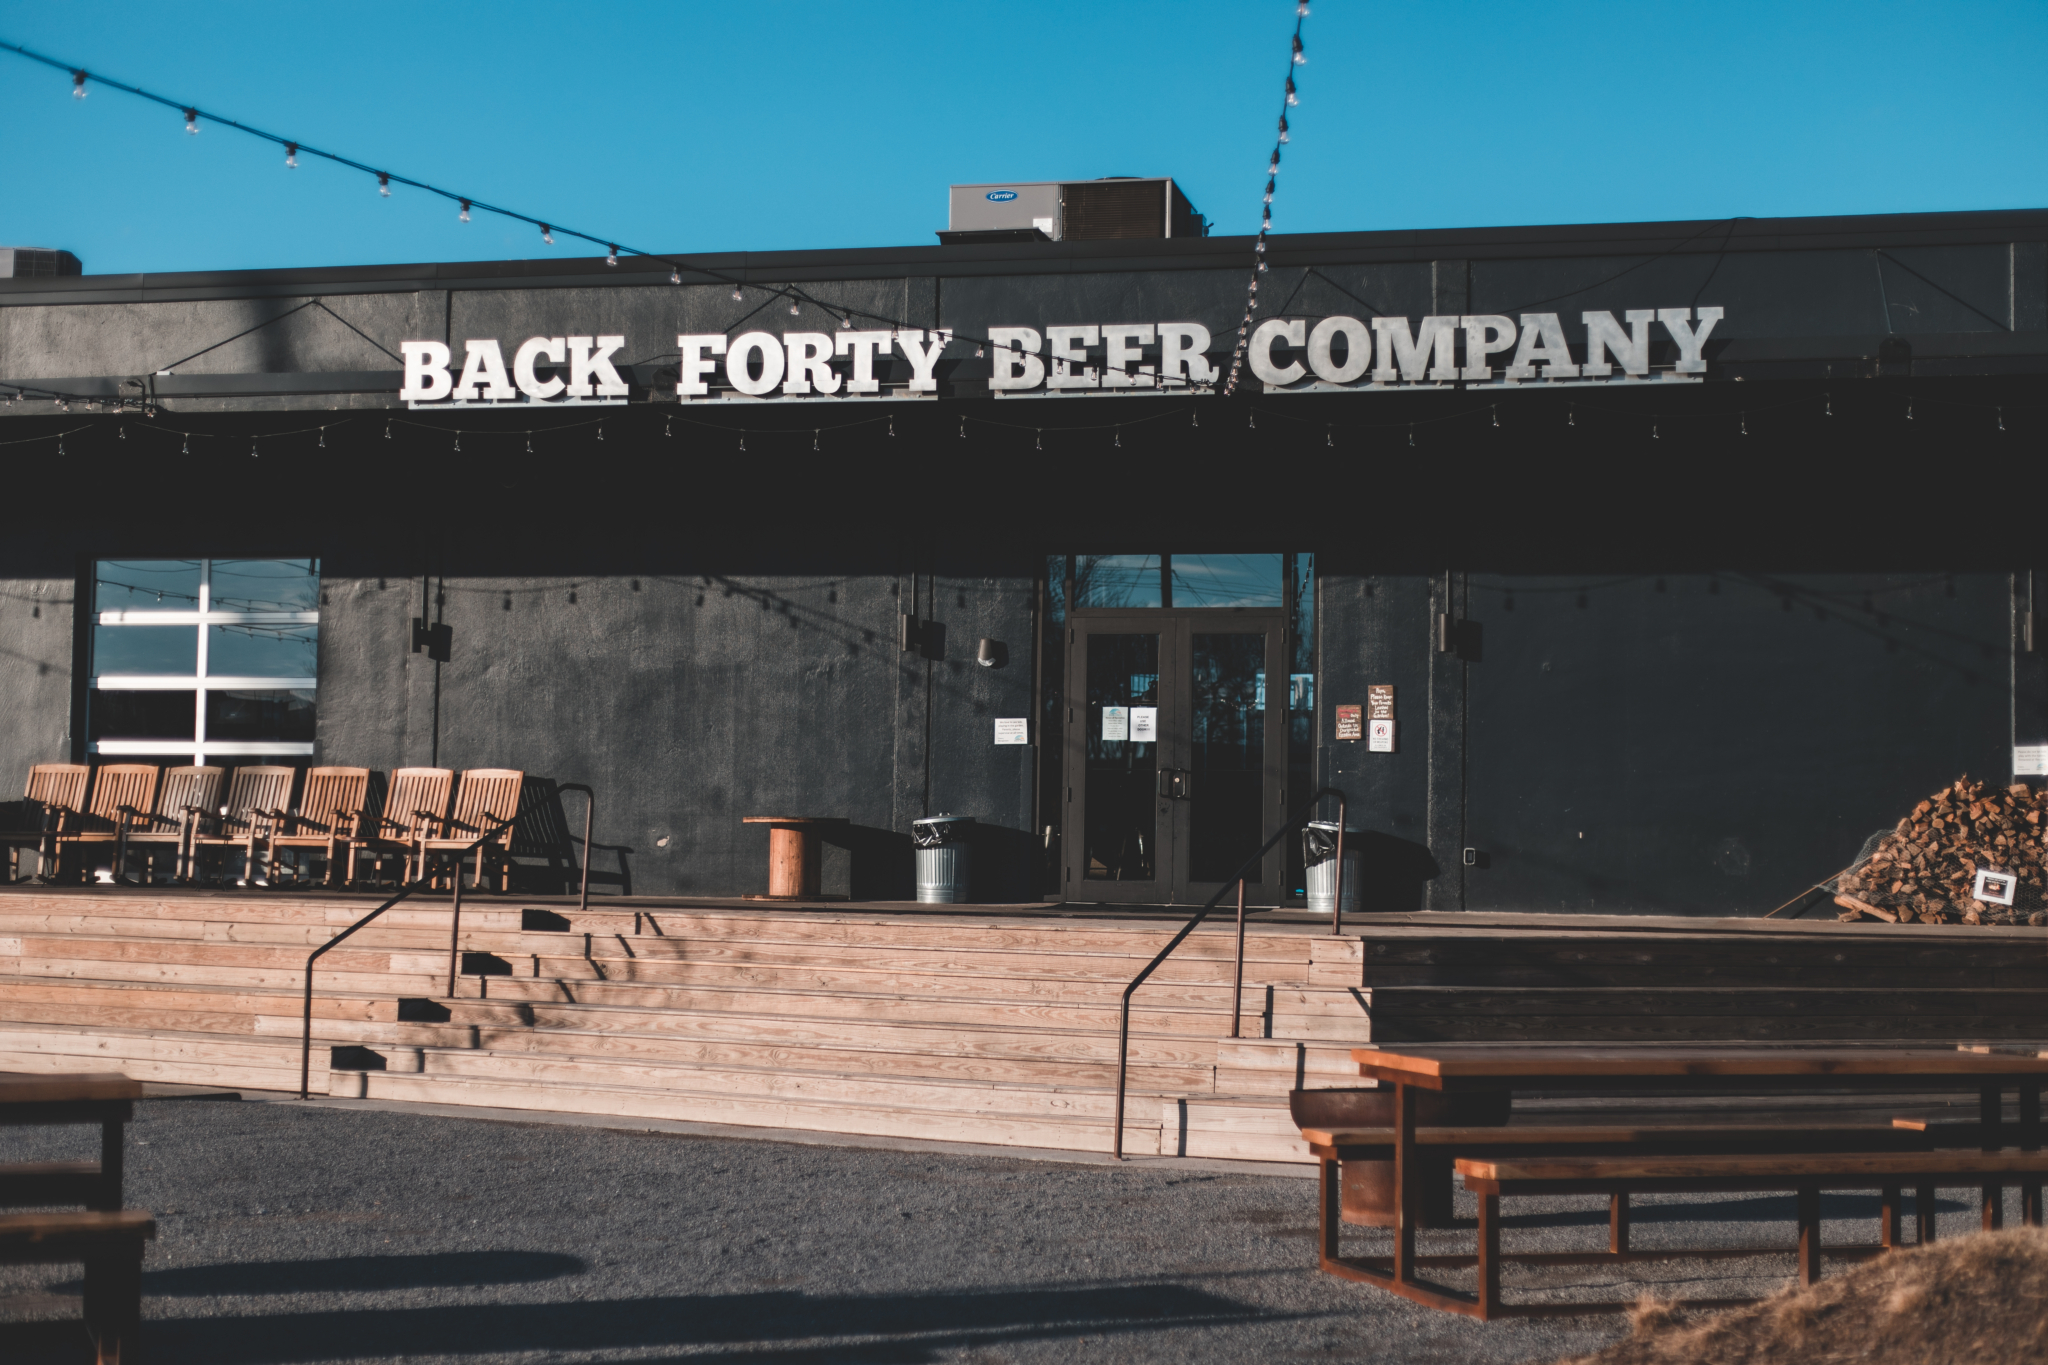 Back Forty beer company